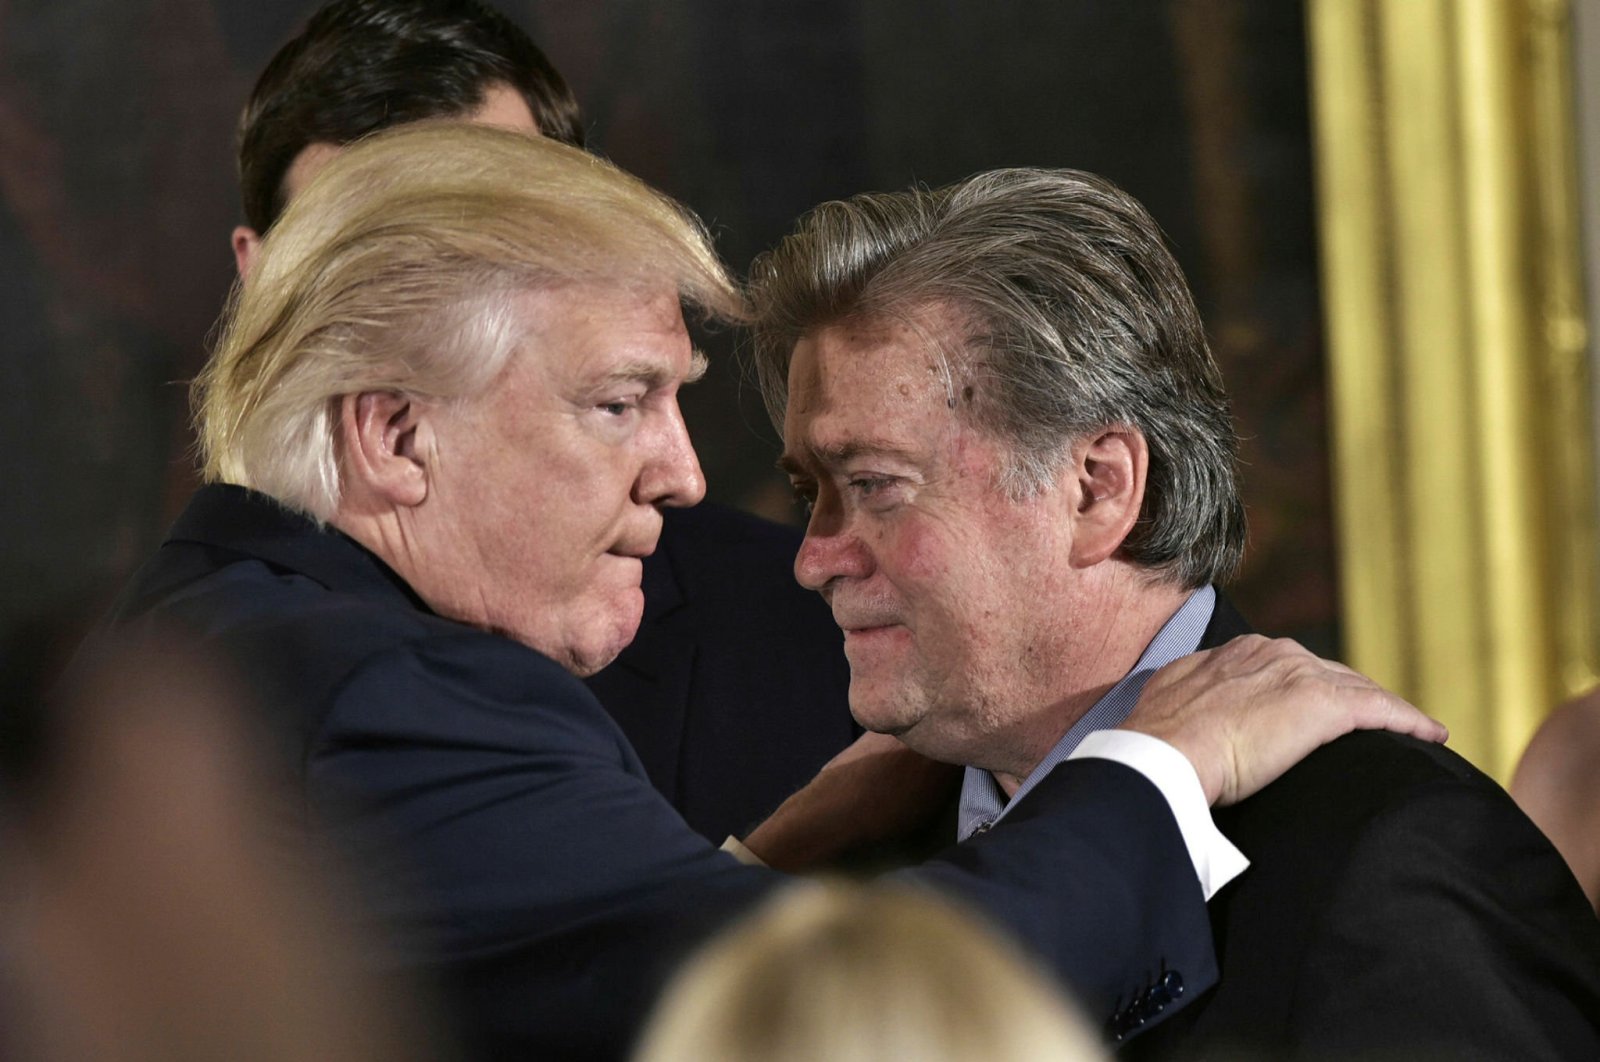 U.S. President Donald Trump congratulates his former advisor Stephen Bannon during the swearing-in of senior staff in the East Room of the White House, Washington, D.C., Jan. 22, 2017. (AFP Photo)